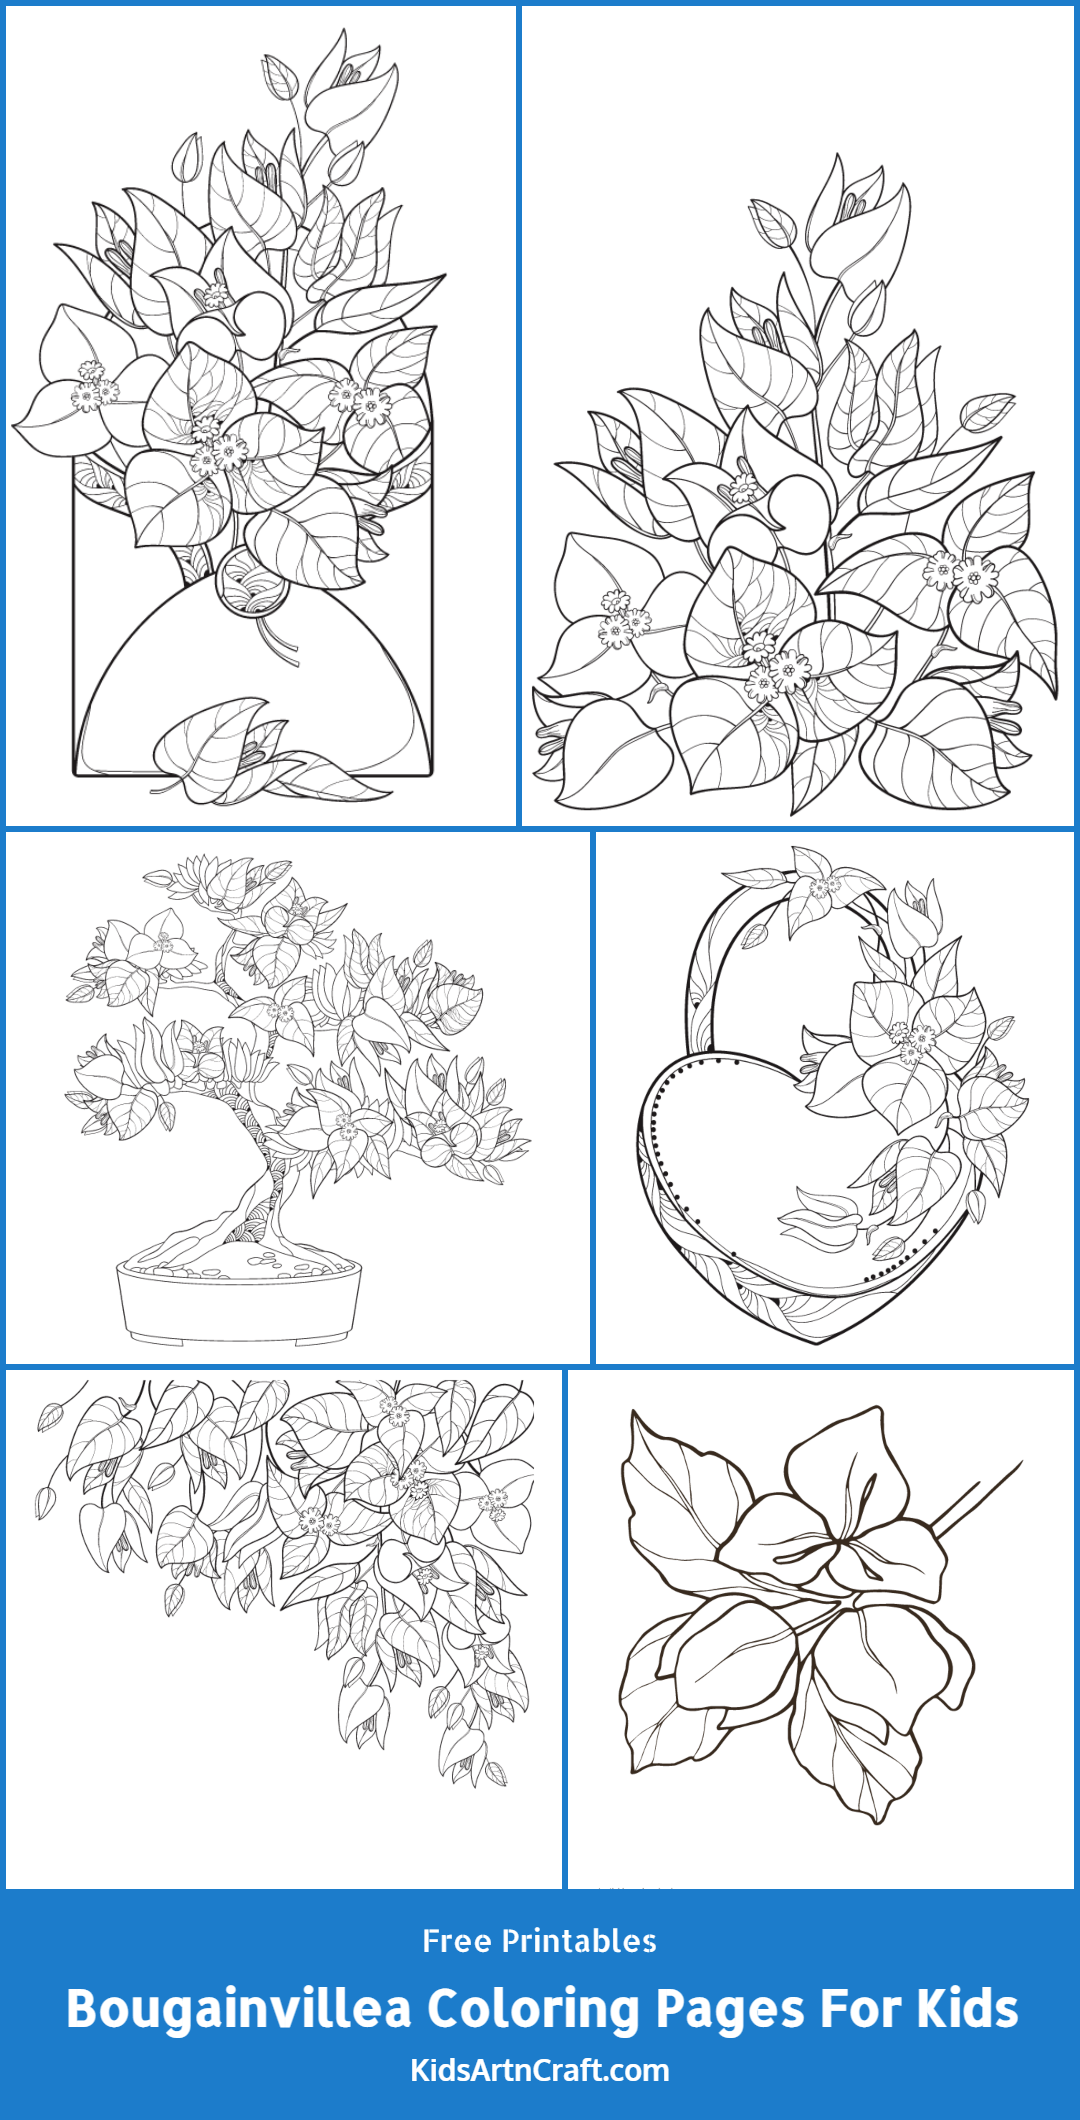 Bougainvillea Coloring Pages For Kids – Free Printables